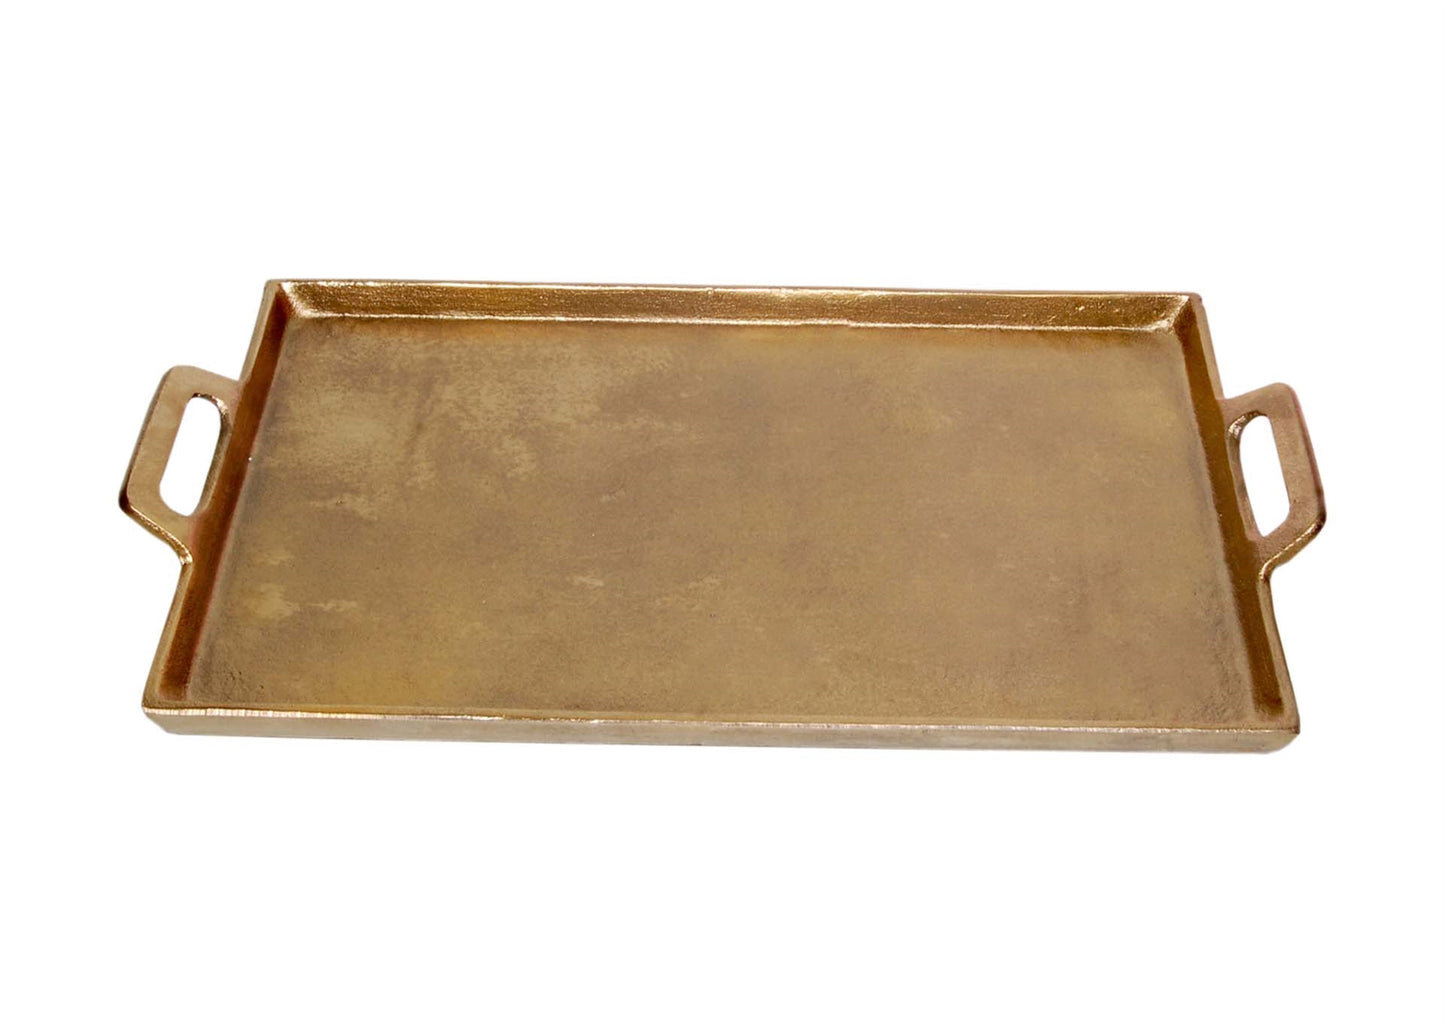 866527 Alum. Tray with Handles, Antique Brass 15x25